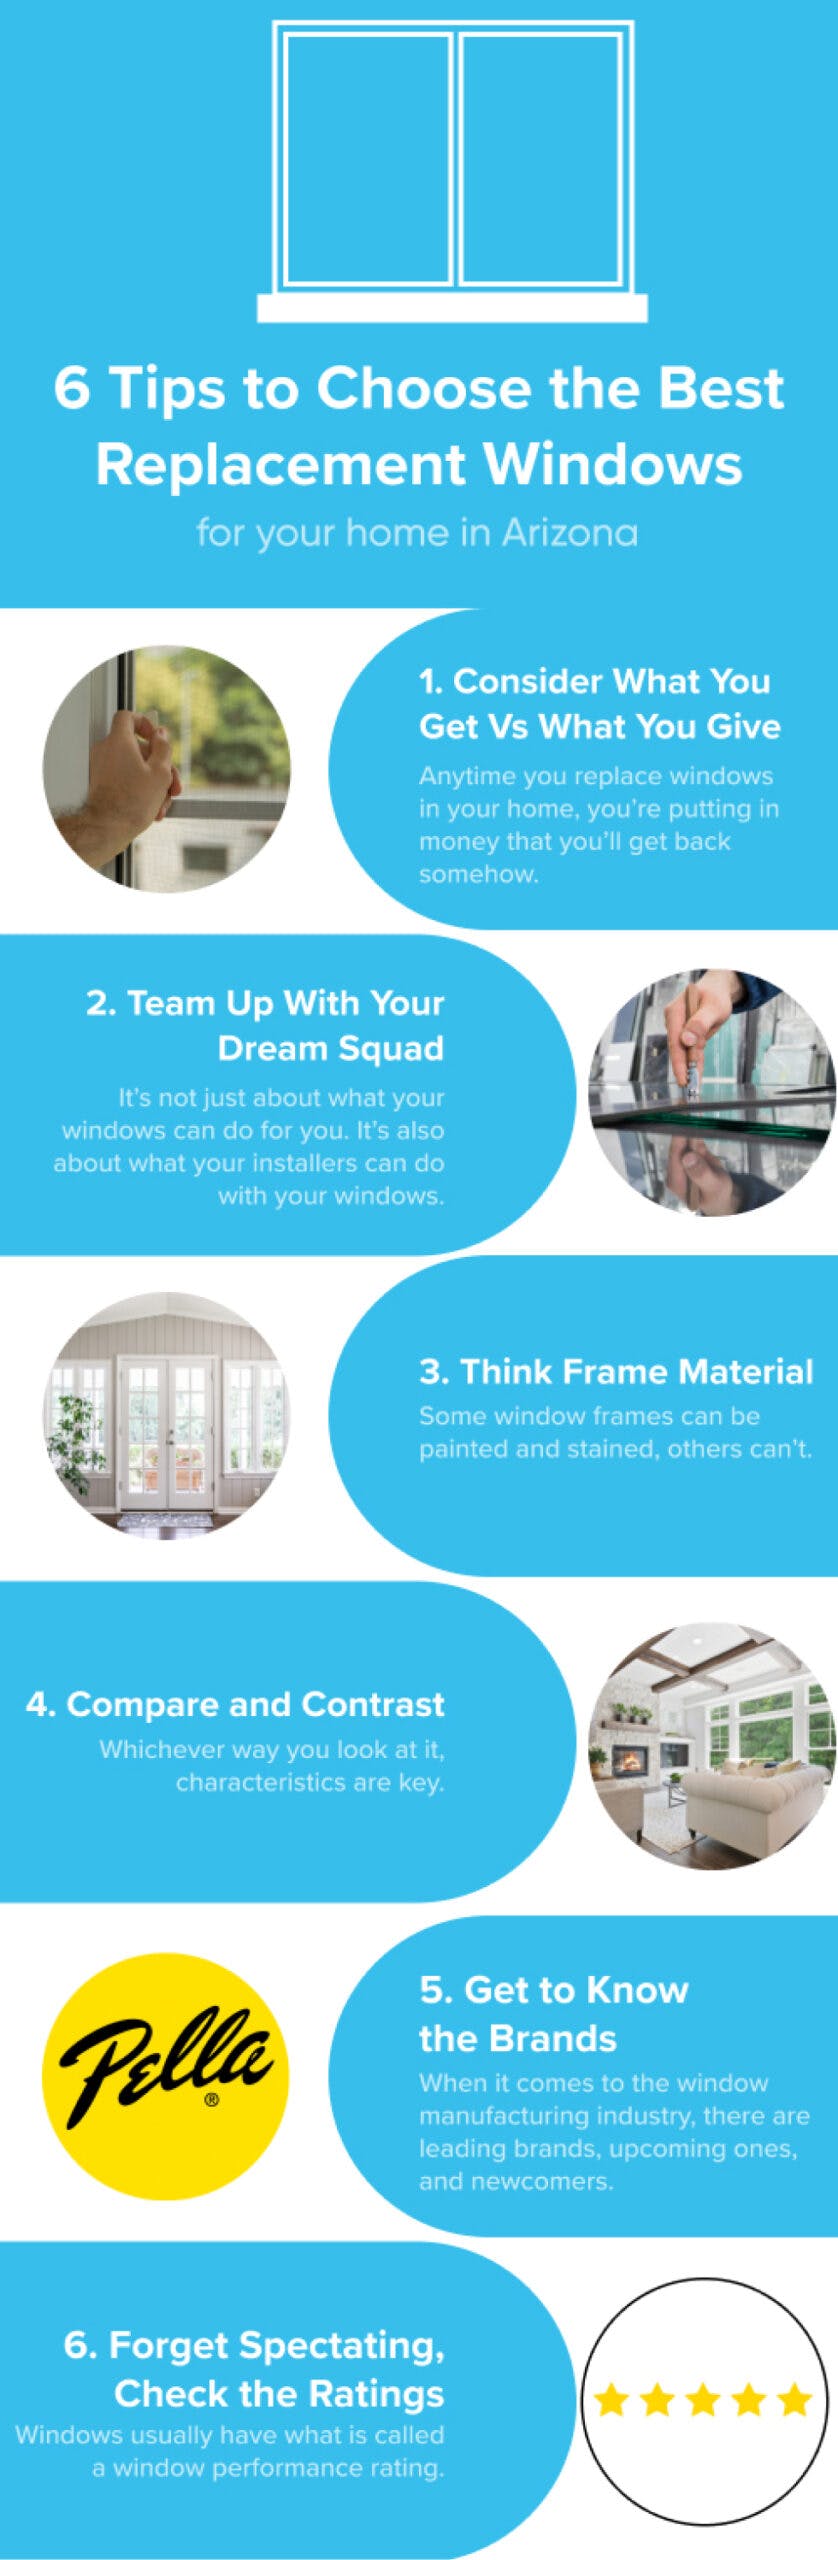 Replacement windows for your home infographic